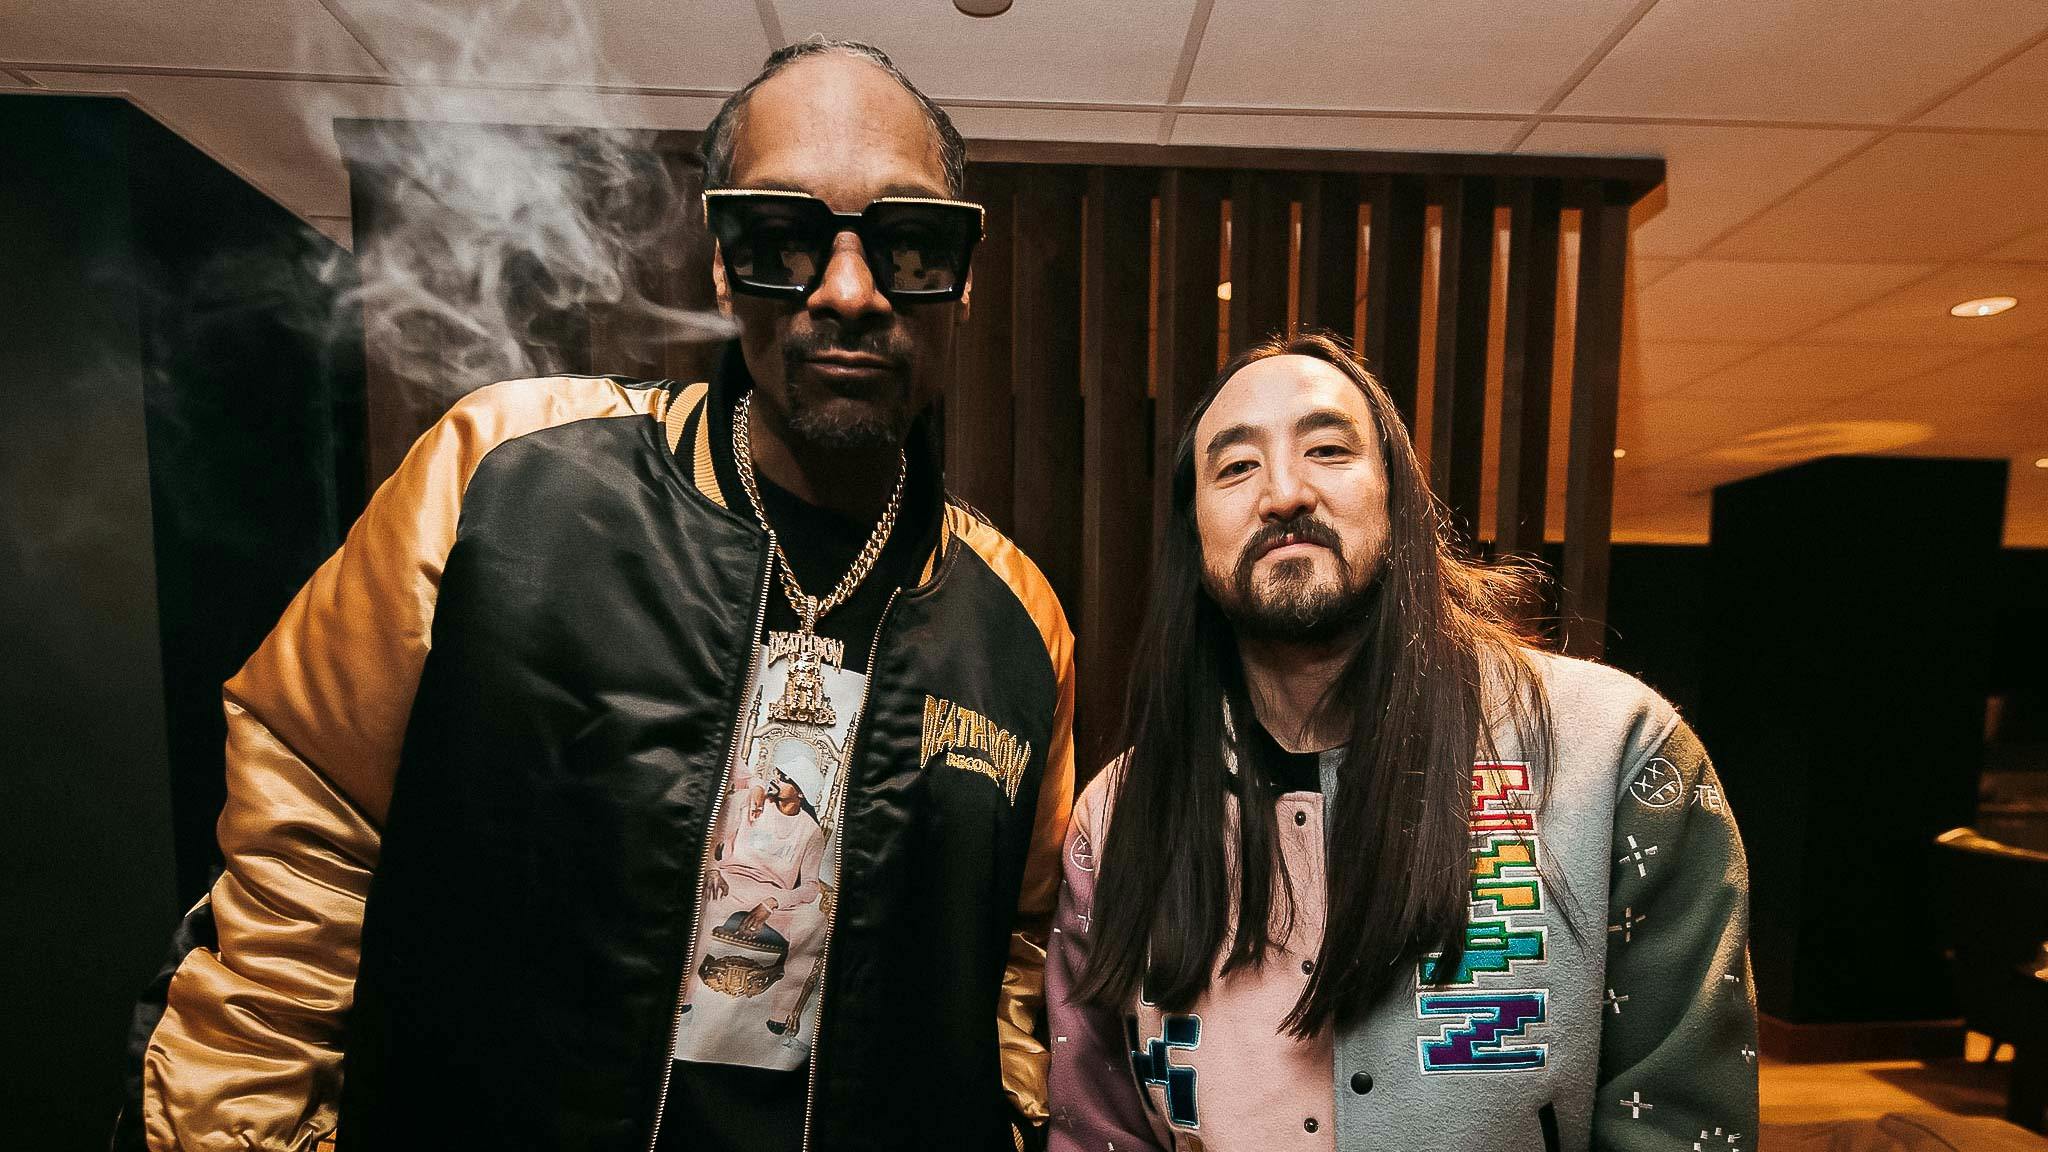 Snoop Dogg standing with Steve Aoki in promotion for ther A0K1VERSE